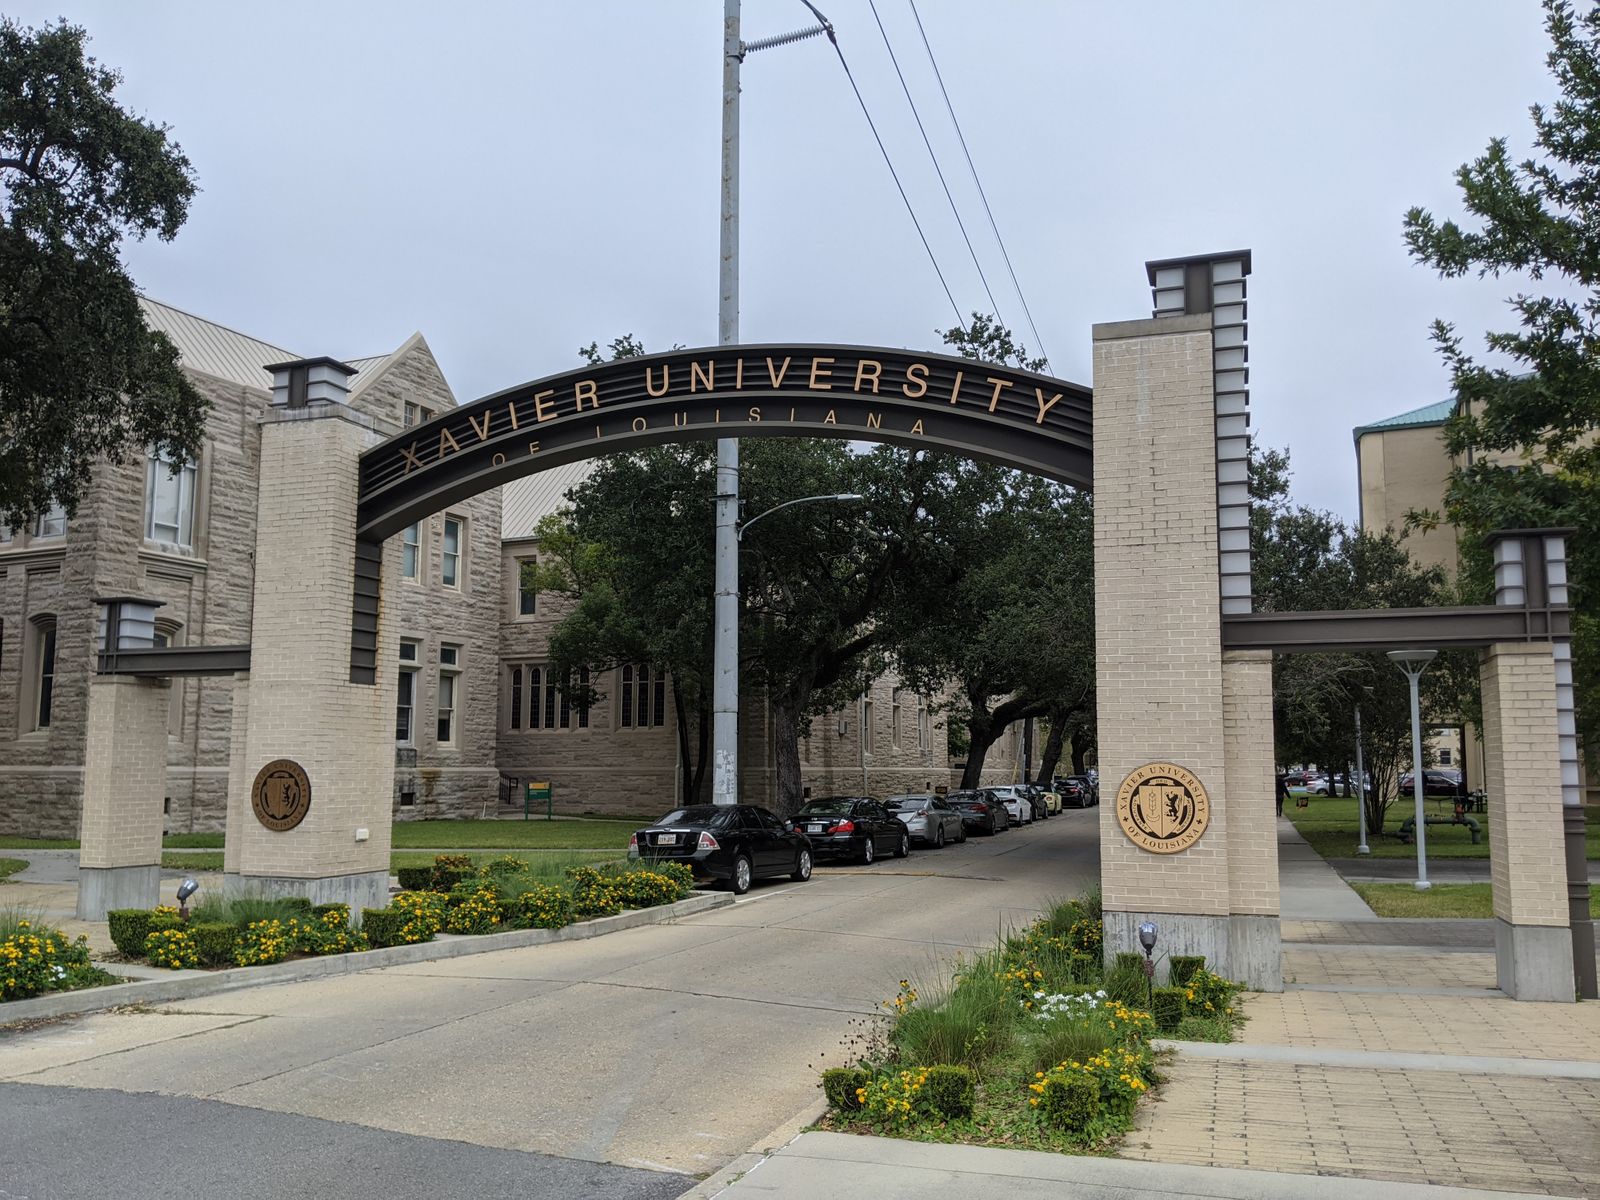 Journalism education on the rise at XULA